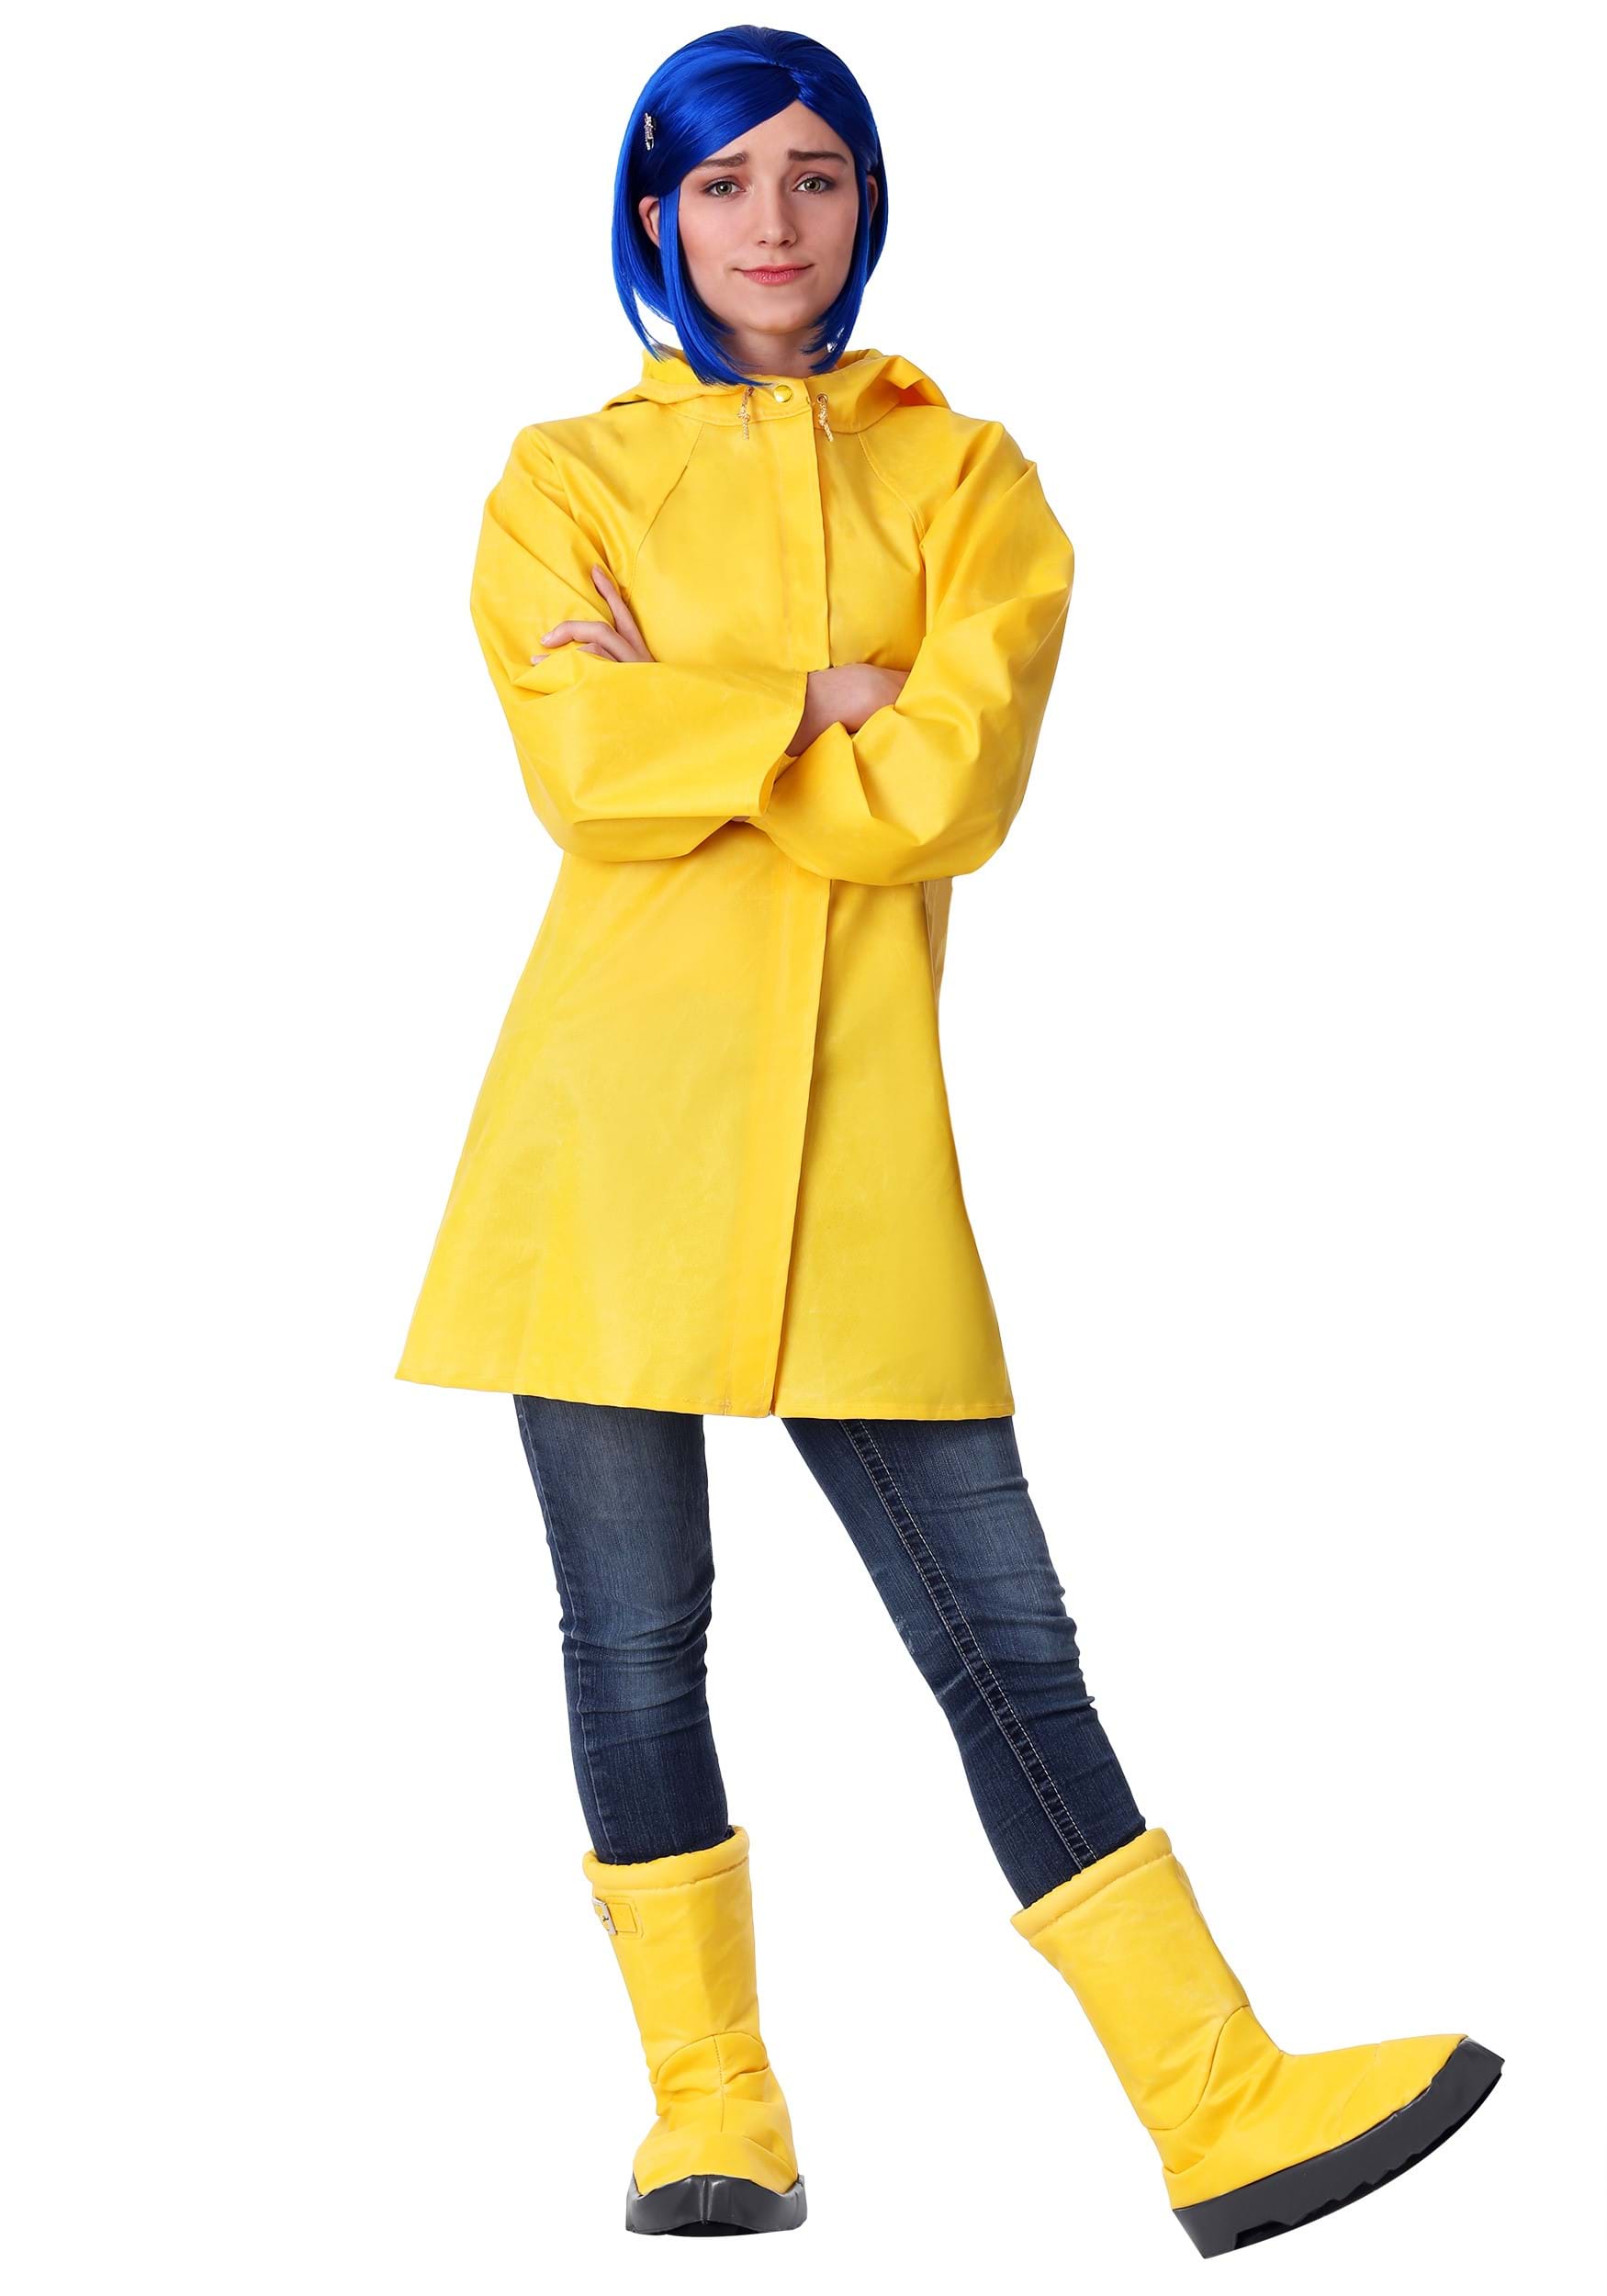 Coraline Costume from Laika